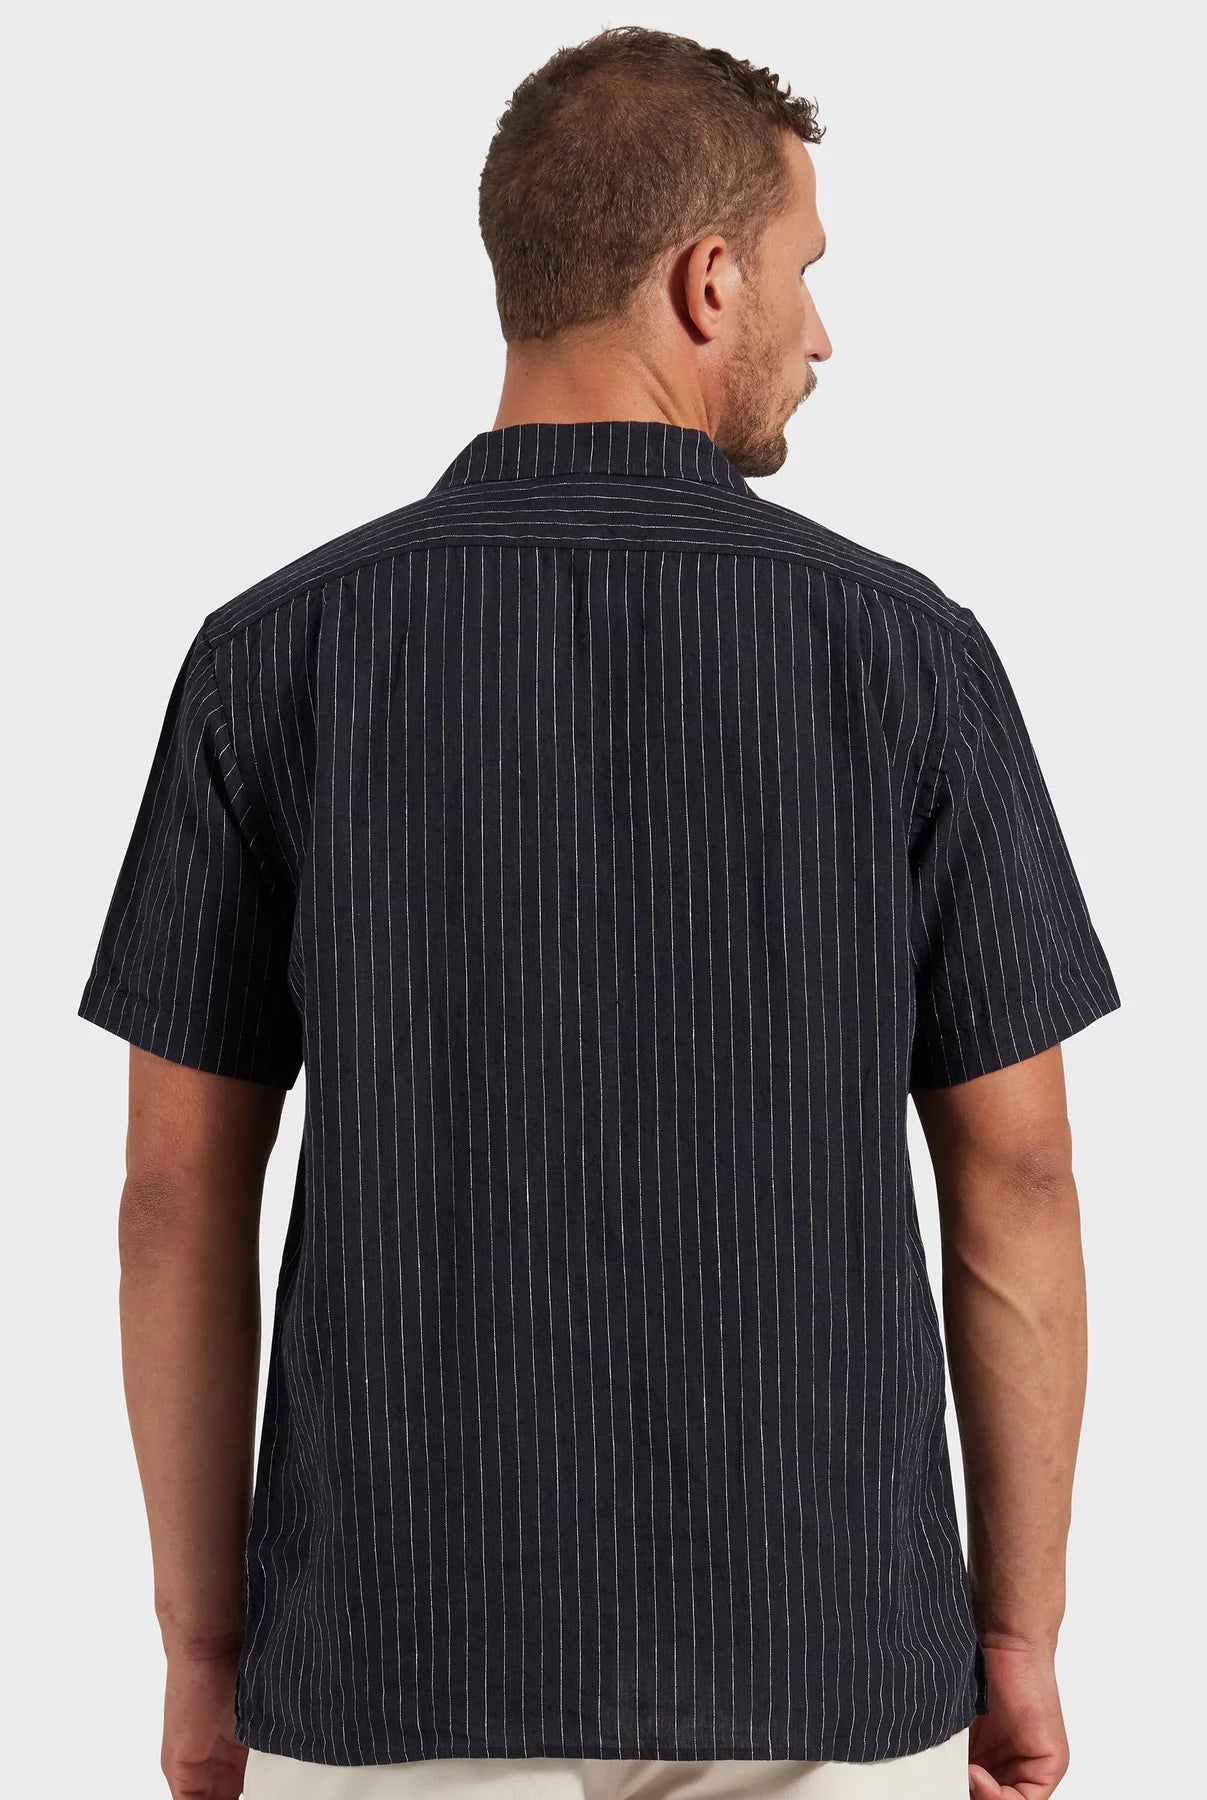 Cannon Short Sleeve Shirt in Navy